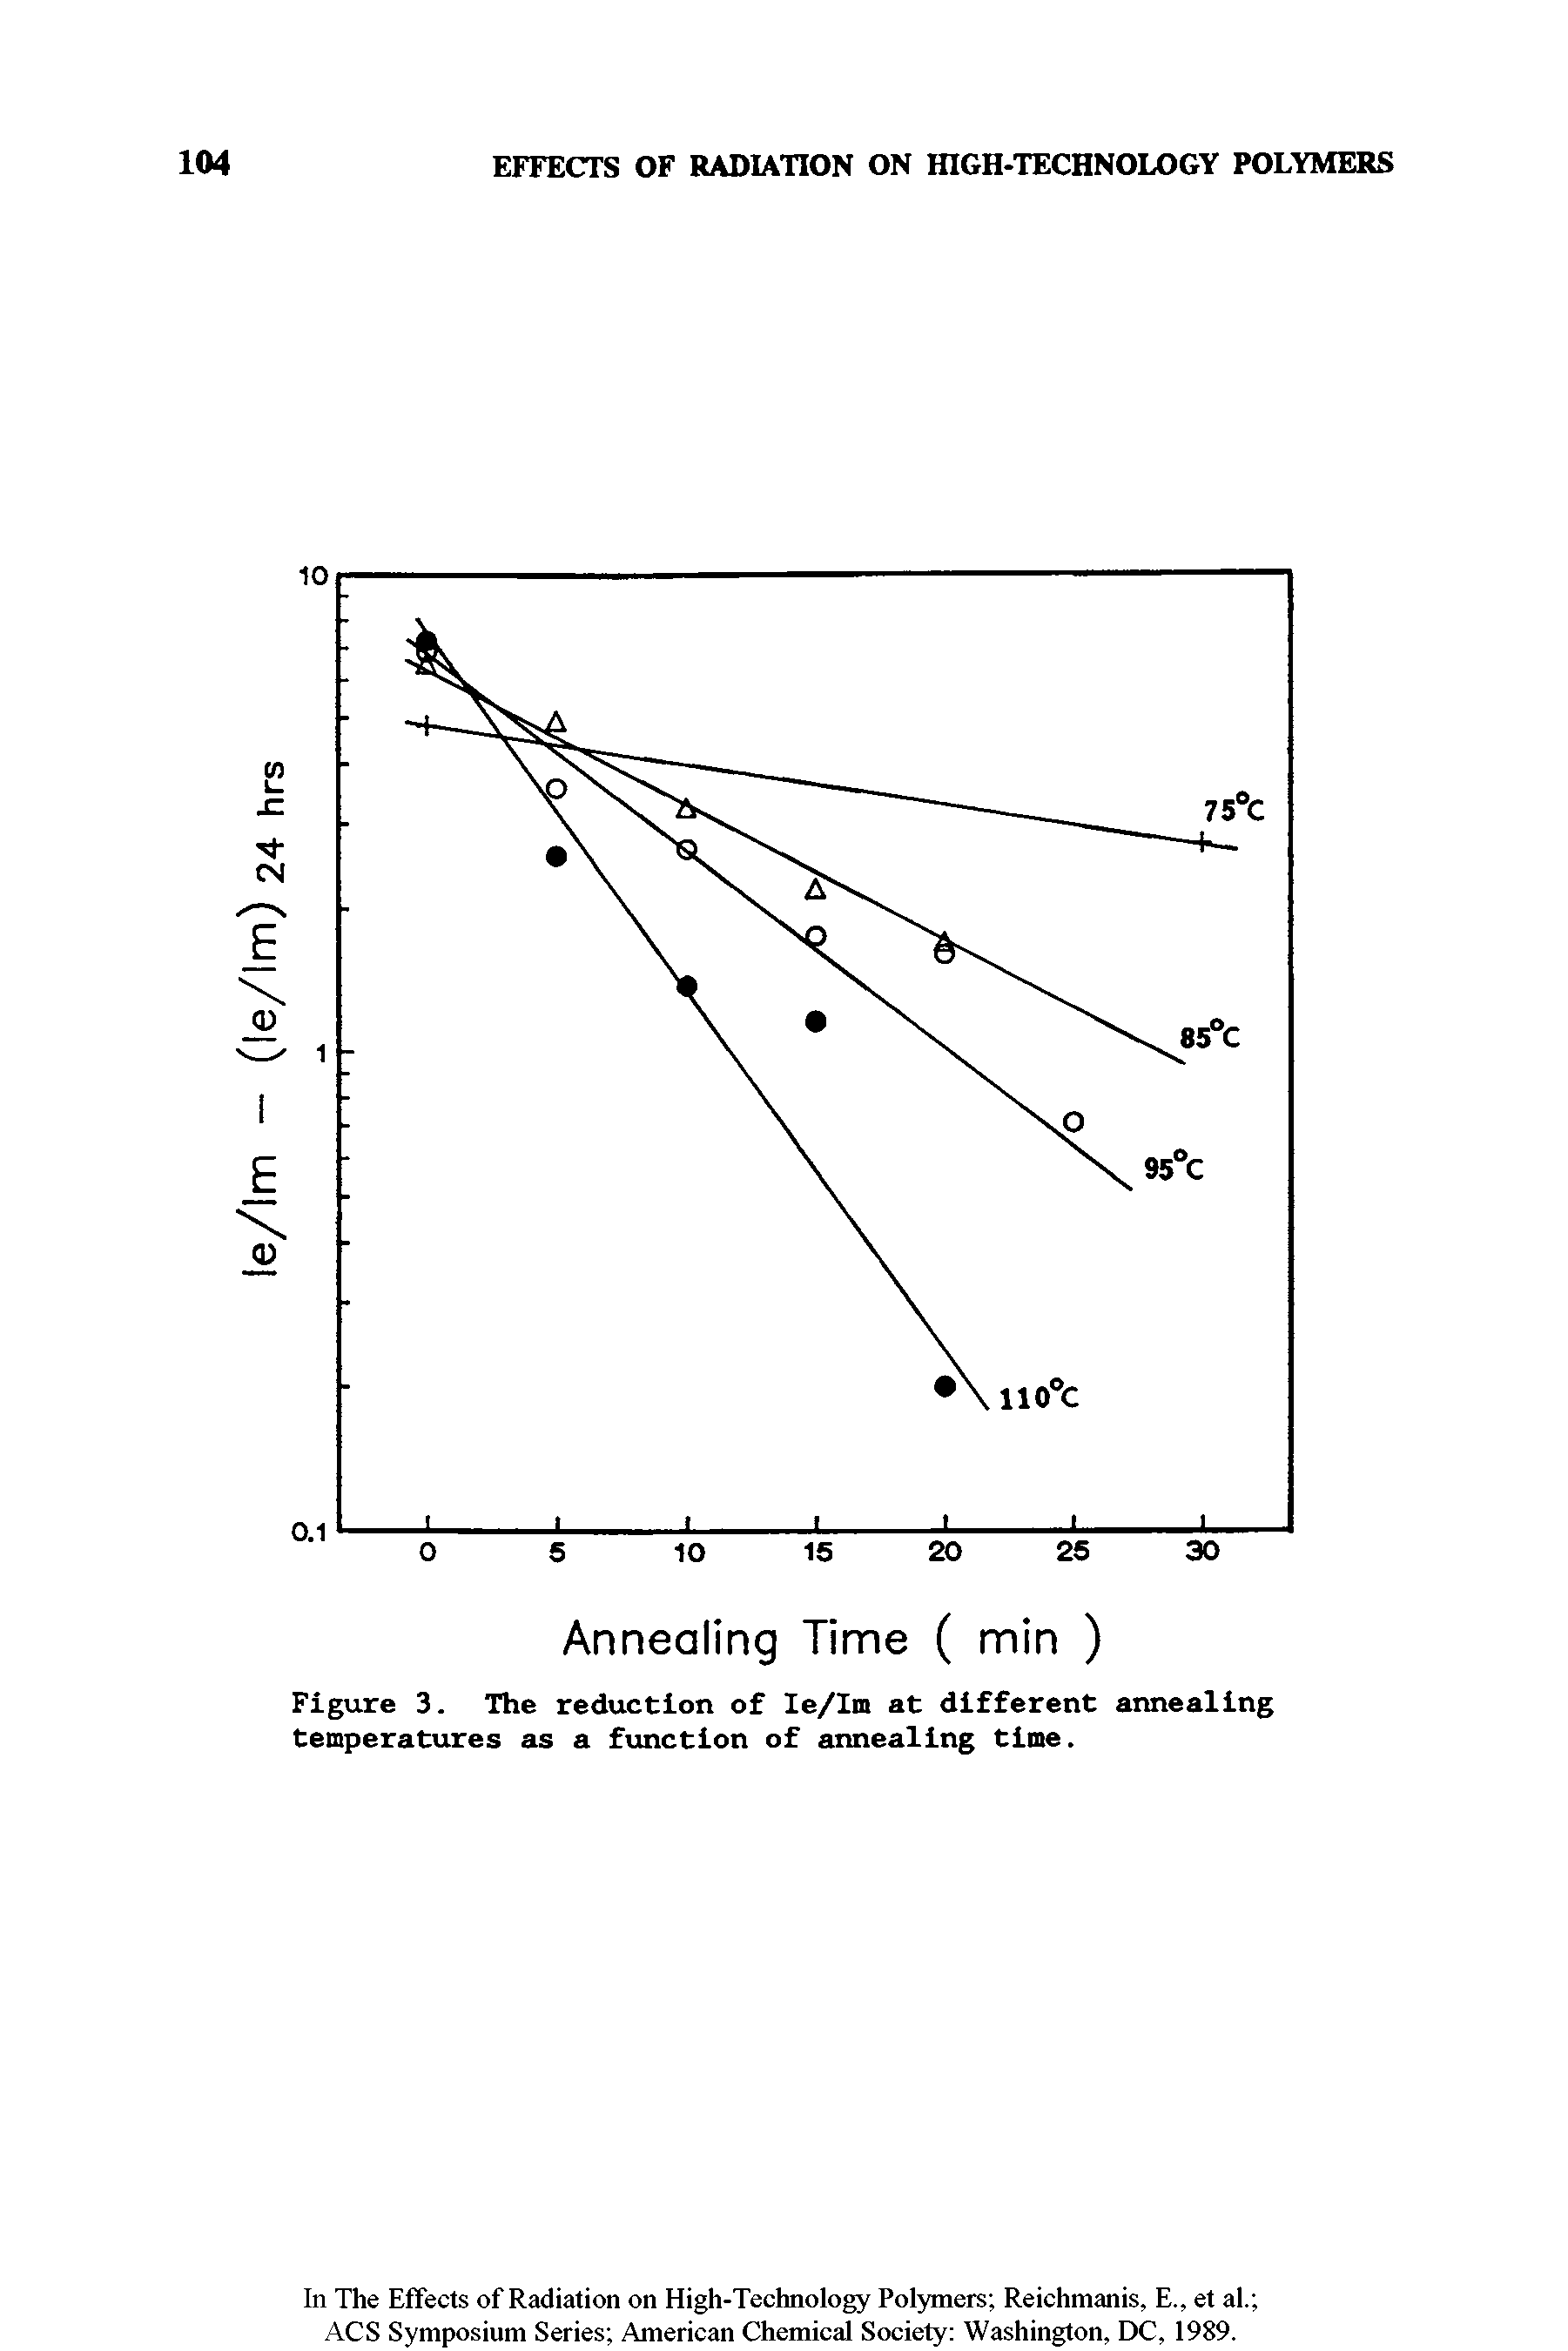 Figure 3. The reduction of Ie/Im at different annealing temperatures as a function of annealing time.